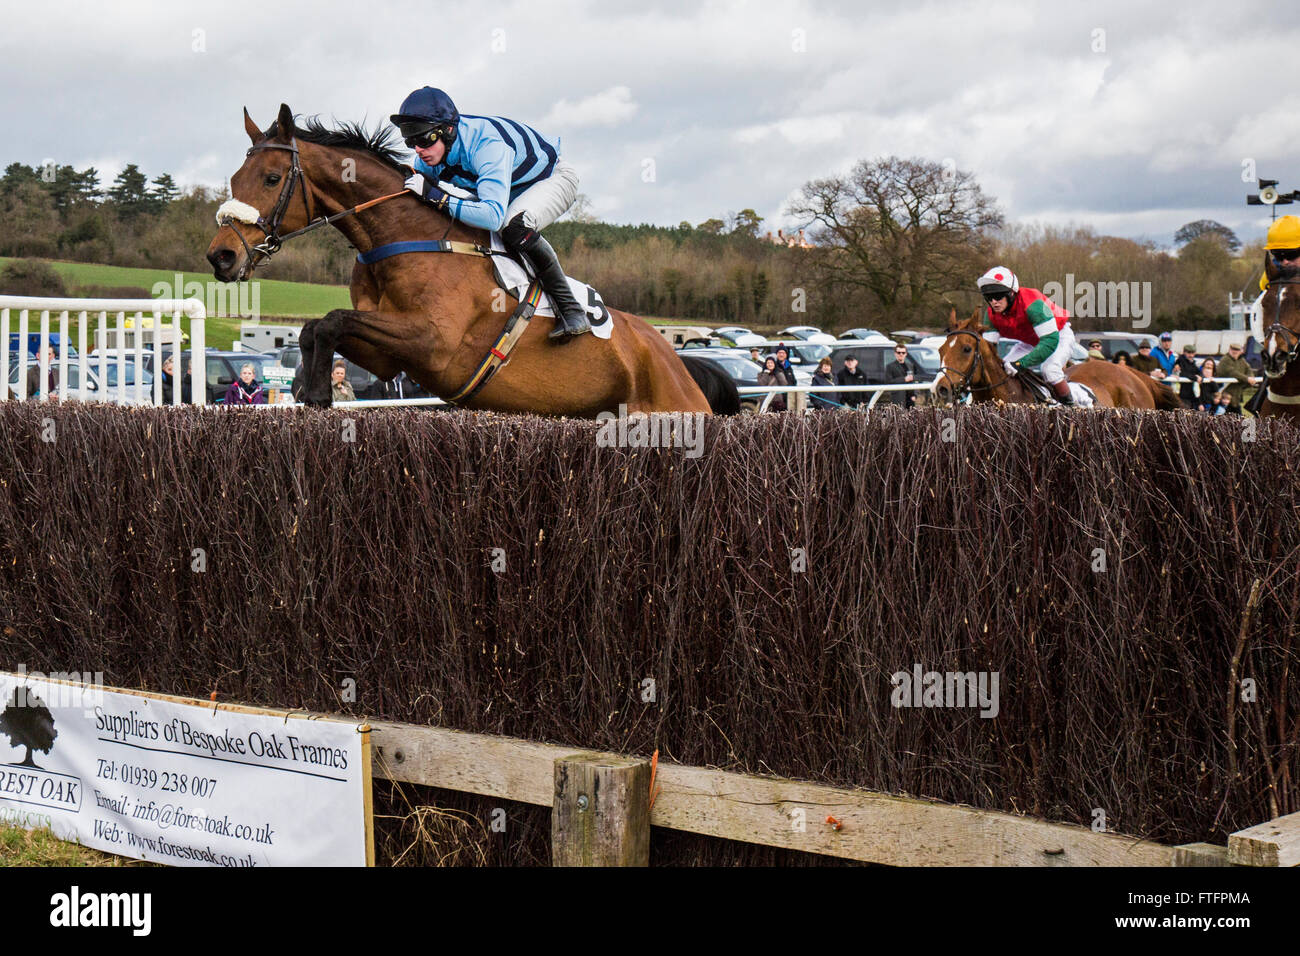 Eyton-on-Severn in Shropshire, UK. 28th March, 2016. 'Ring Ben', ridden by Paddy Gerety, and owned by Mr. P. A. Jones, in the first race, The North and South Shropshire Hunt members, Subscribers & Farmers Race, at the Easter Bank Holiday Point to Point races. Stock Photo